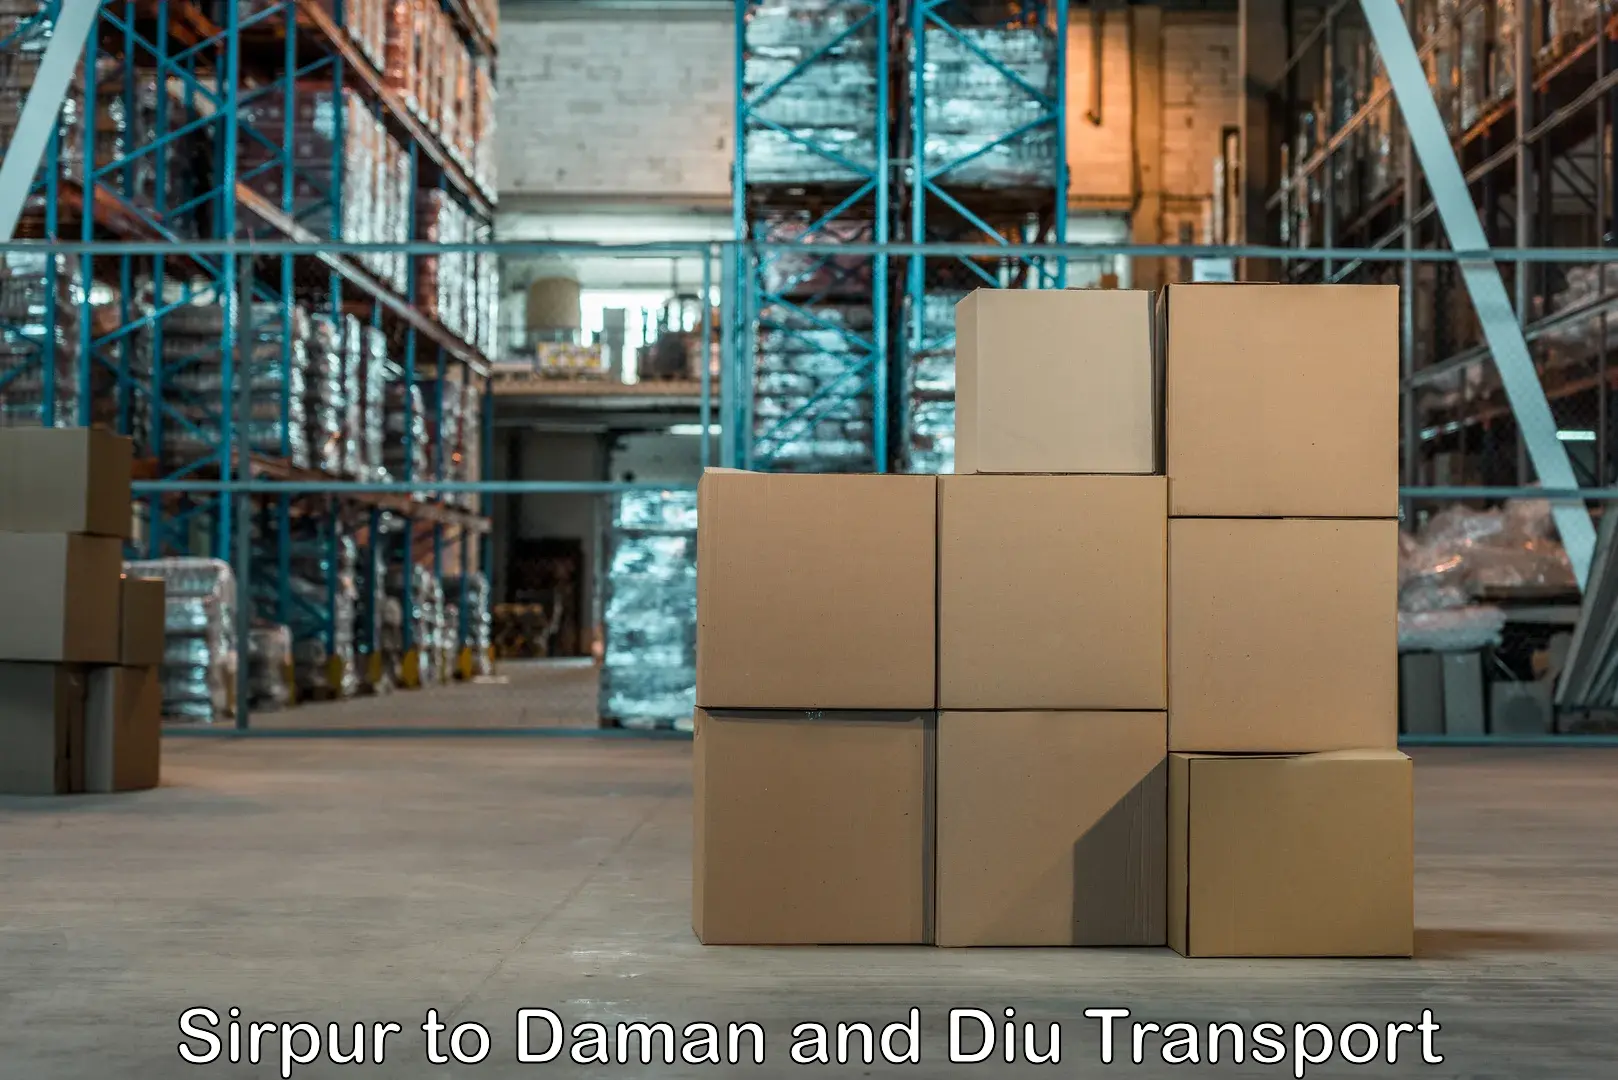 Container transport service Sirpur to Daman and Diu